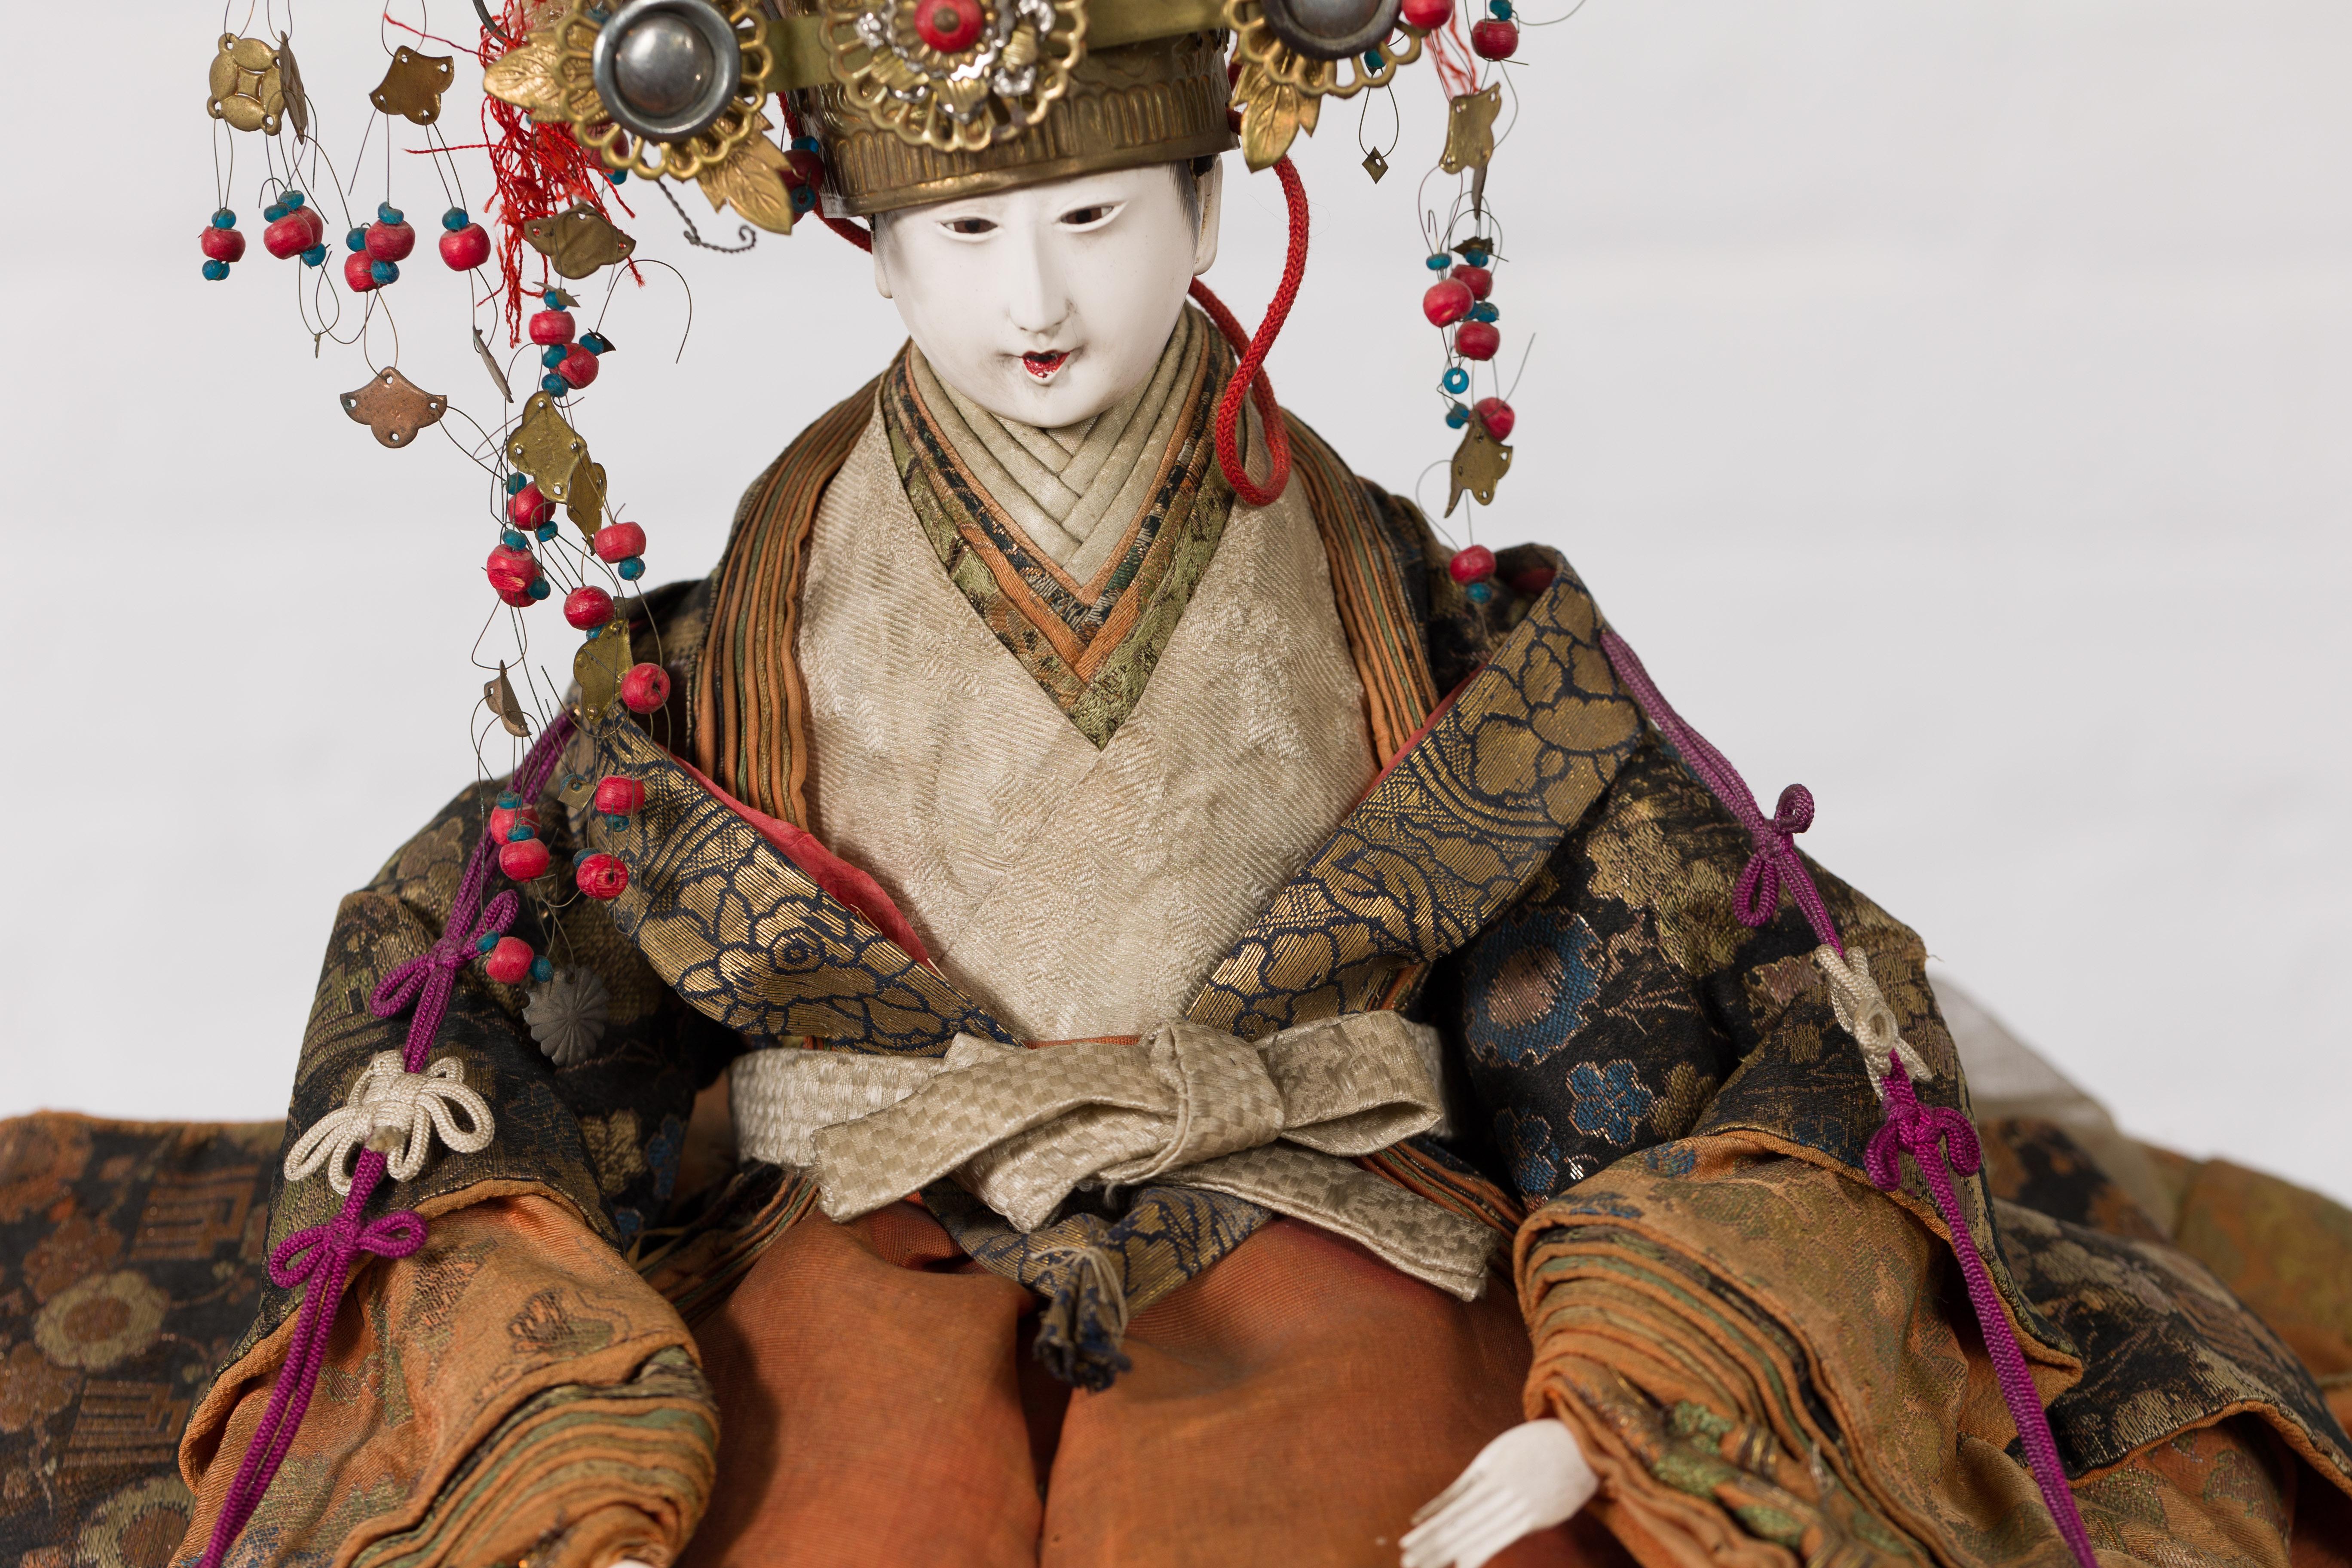 Japanese Taisho Period Sitting Doll with Silk Clothing and Ornate Headdress In Good Condition For Sale In Yonkers, NY